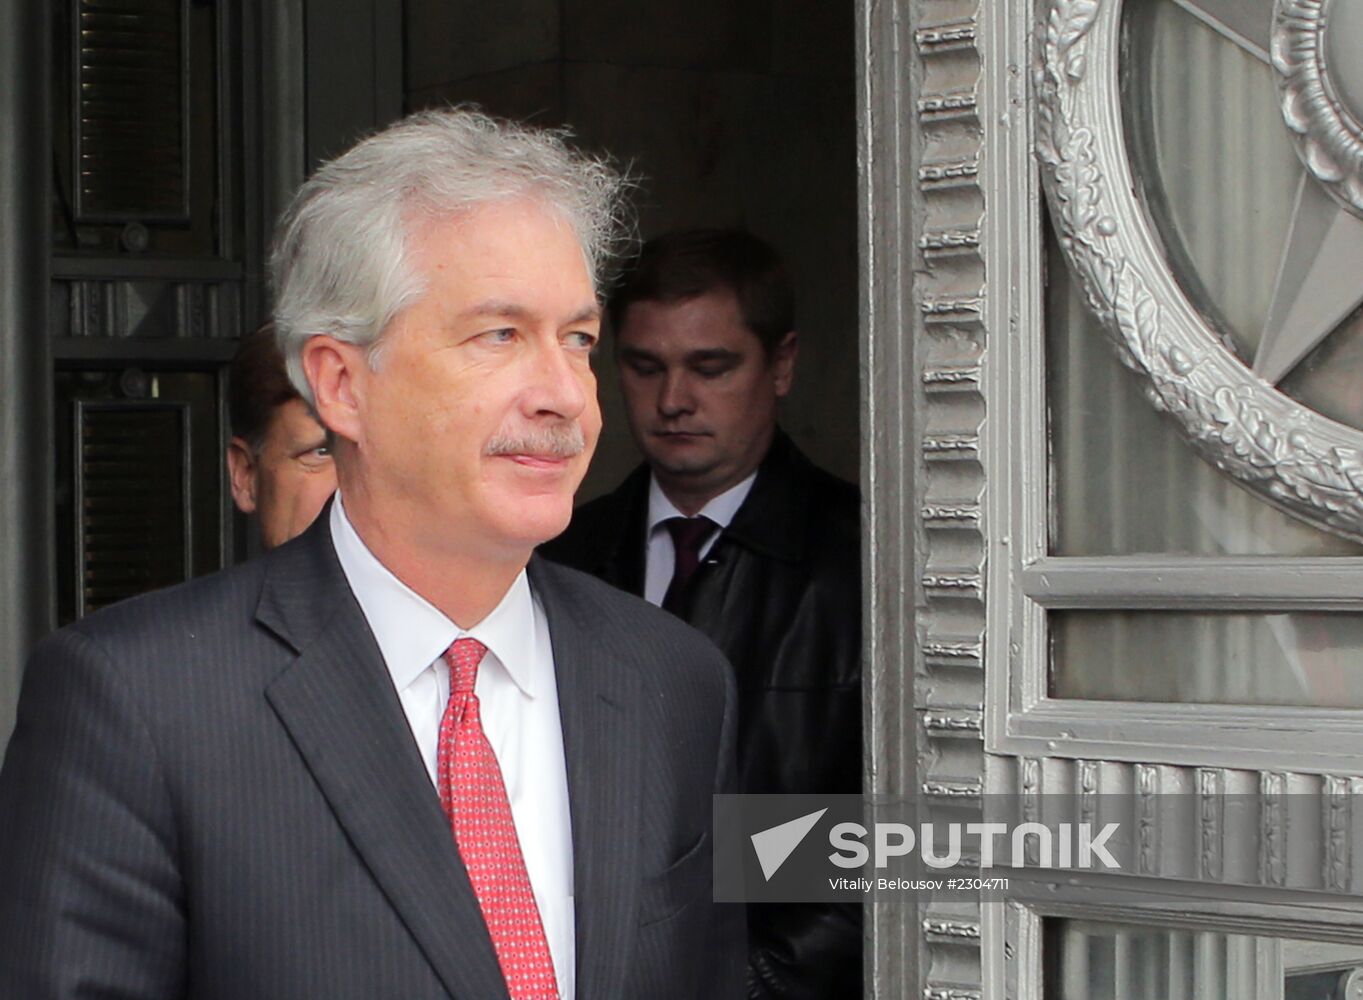 William Burns and Michael McFaul visit Russian Foreign Ministry